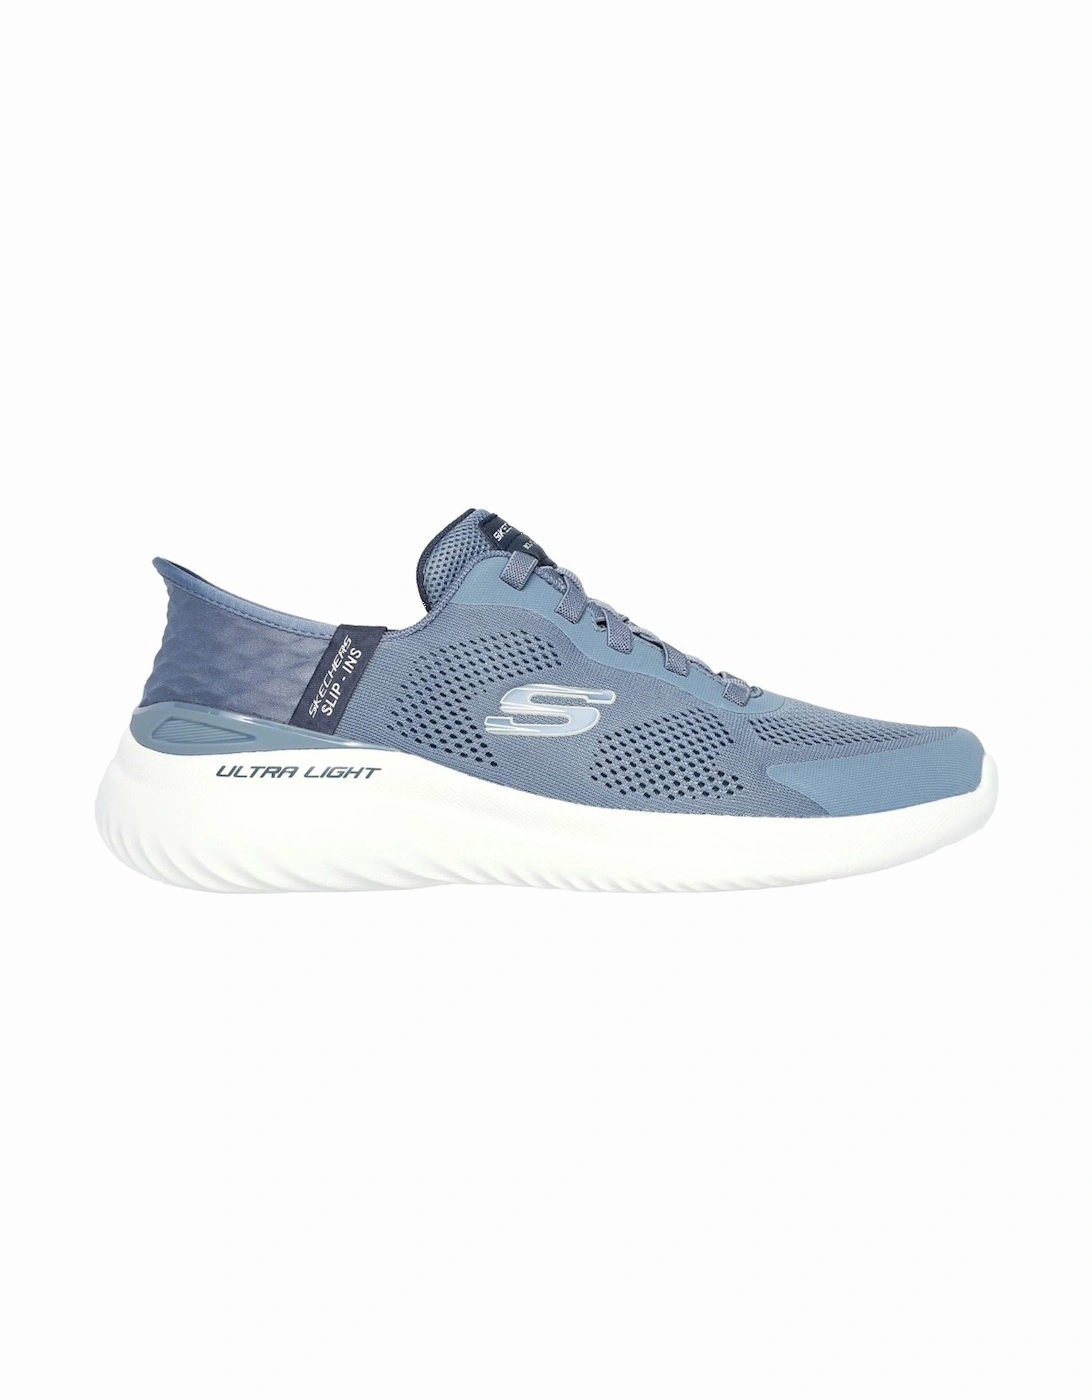 Bounder 2.0 Emerged Mens Trainers